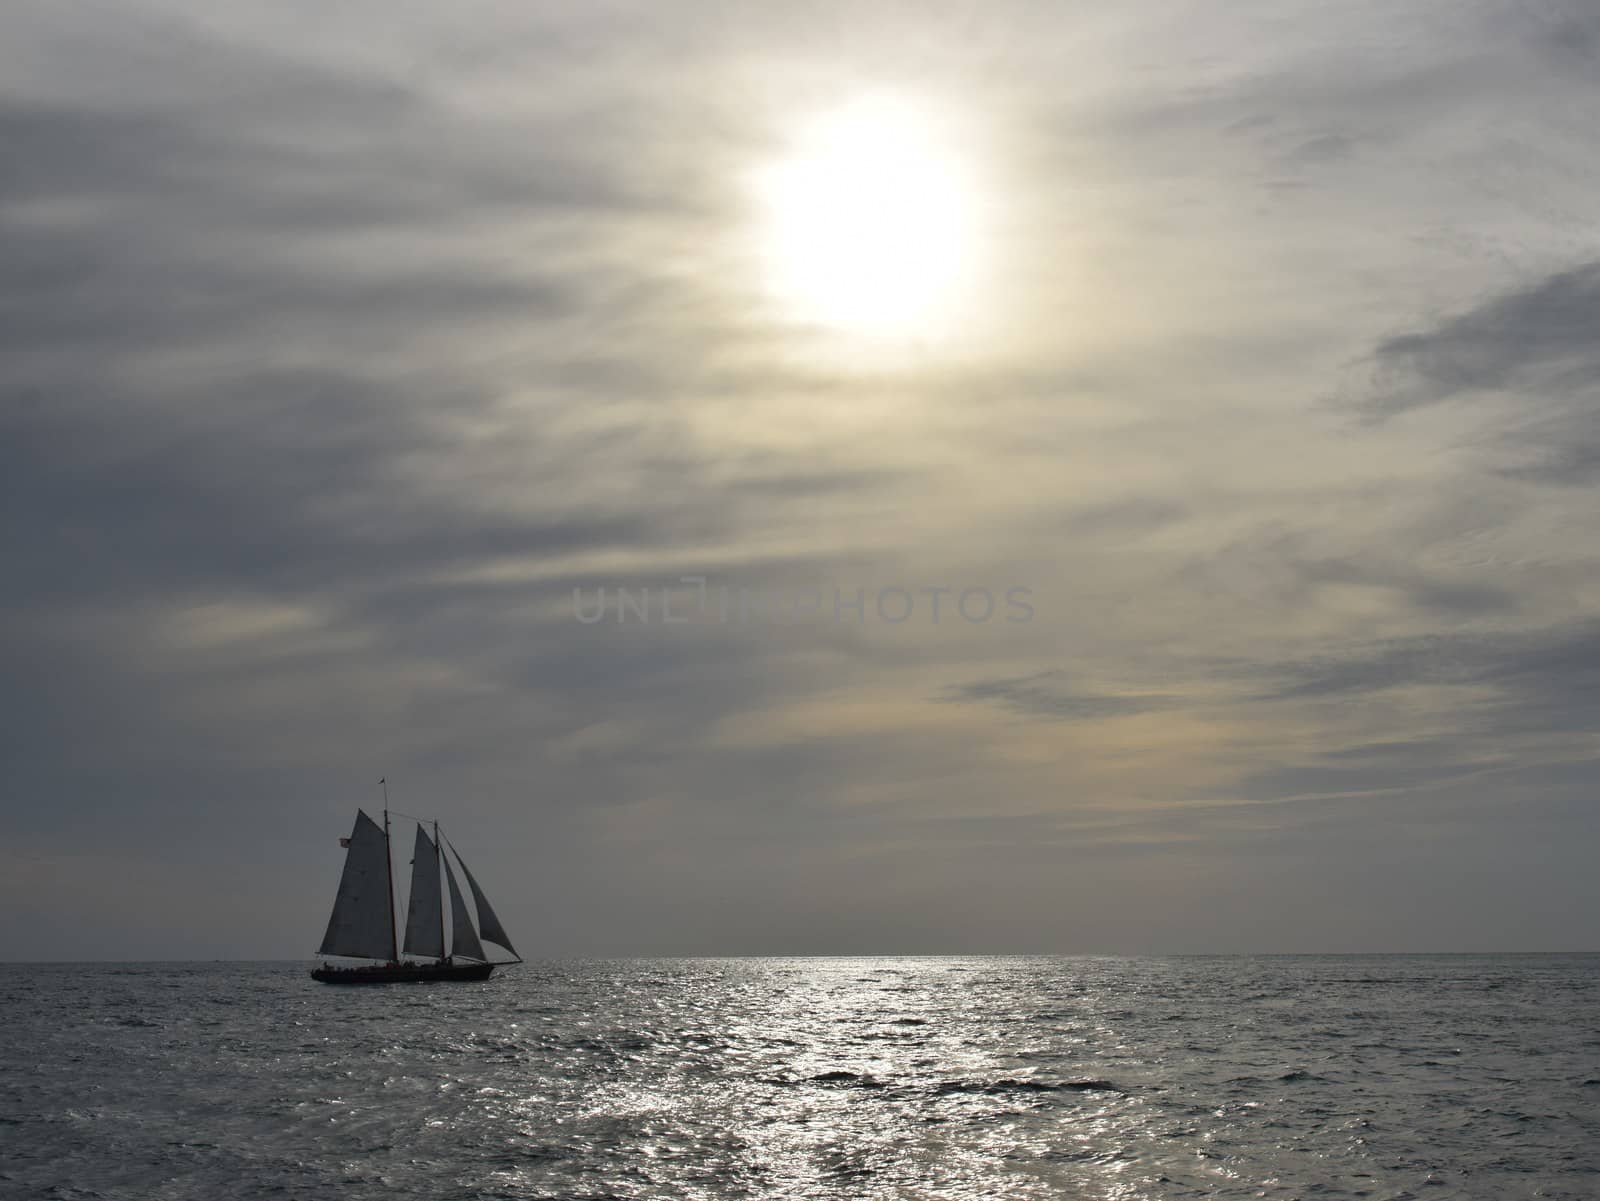 Sailboat on Ocean against Sunset Sky by TheDutchcowboy